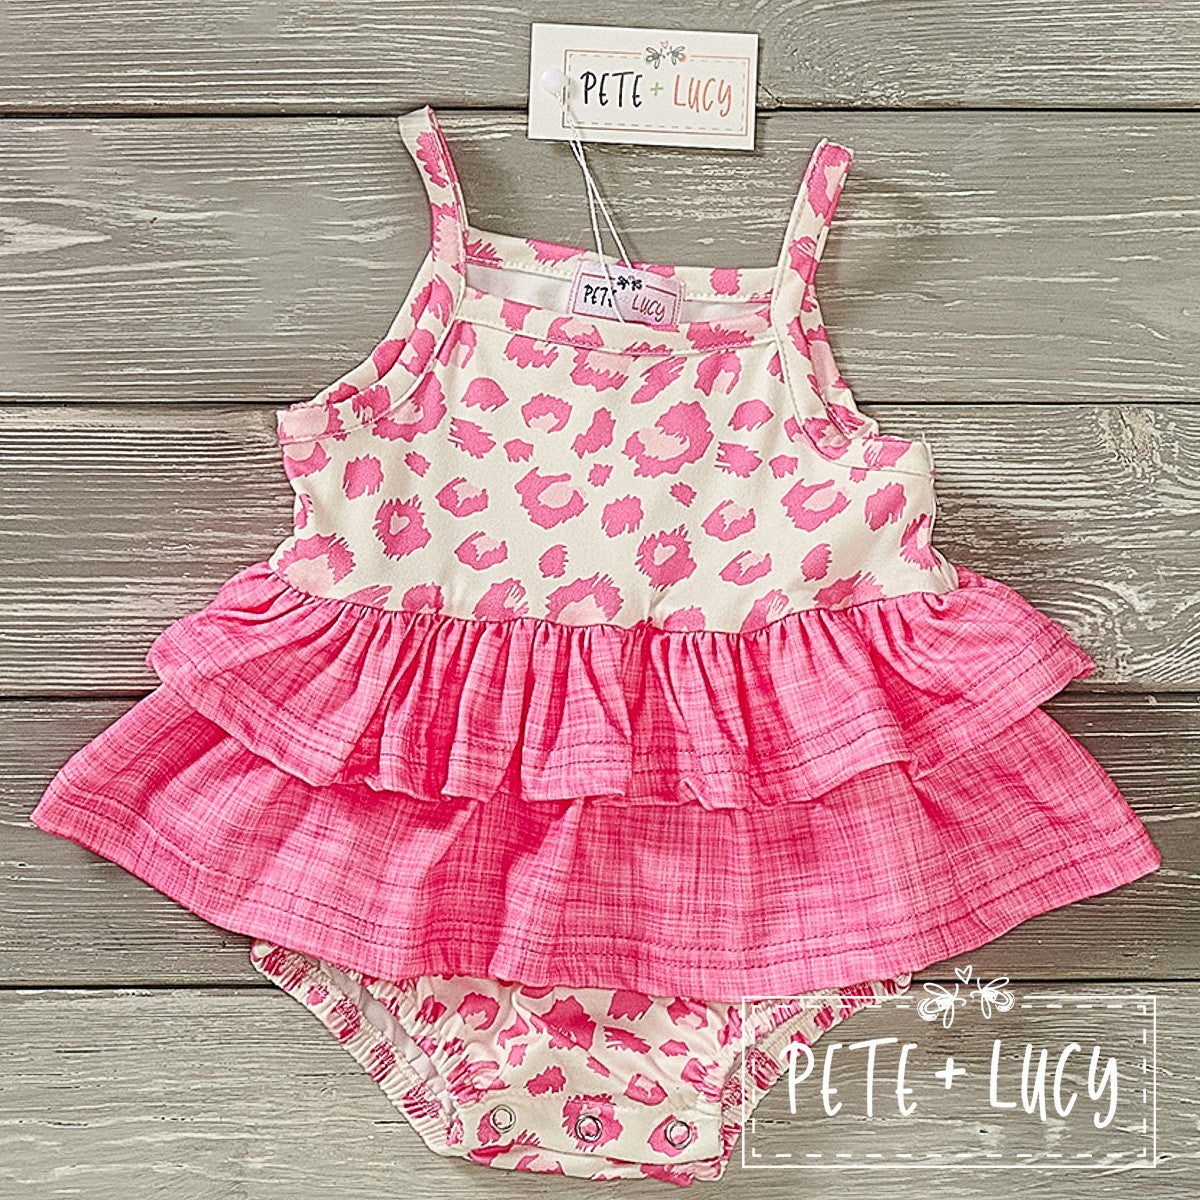 Pink Safari Infant Girl's Romper by Pete + Lucy